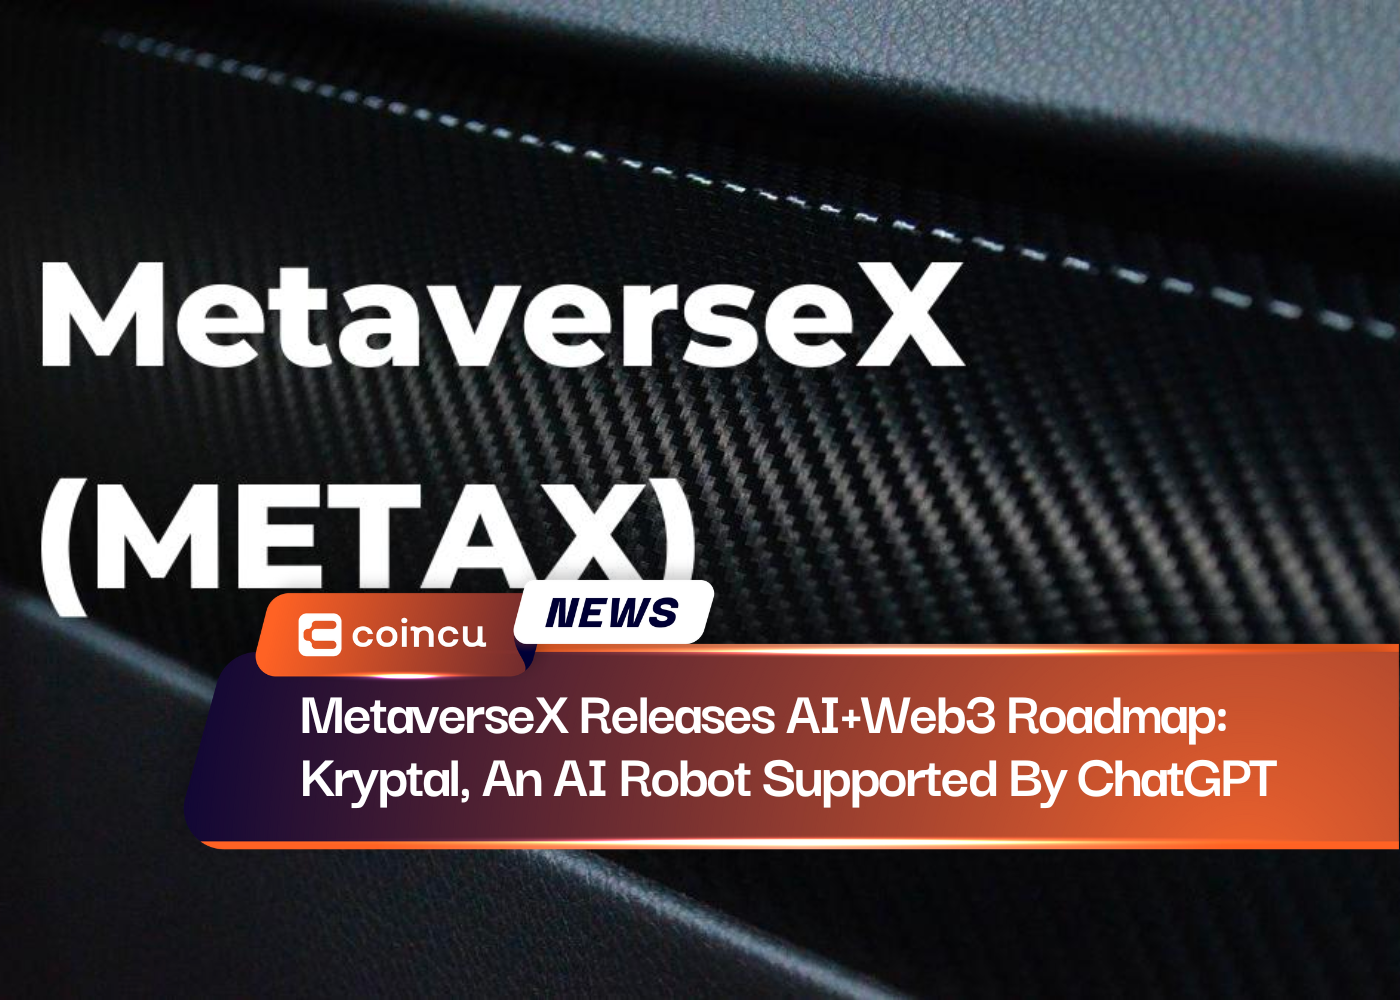 MetaverseX Releases AI+Web3 Roadmap: Kryptal, An AI Robot Supported By ChatGPT